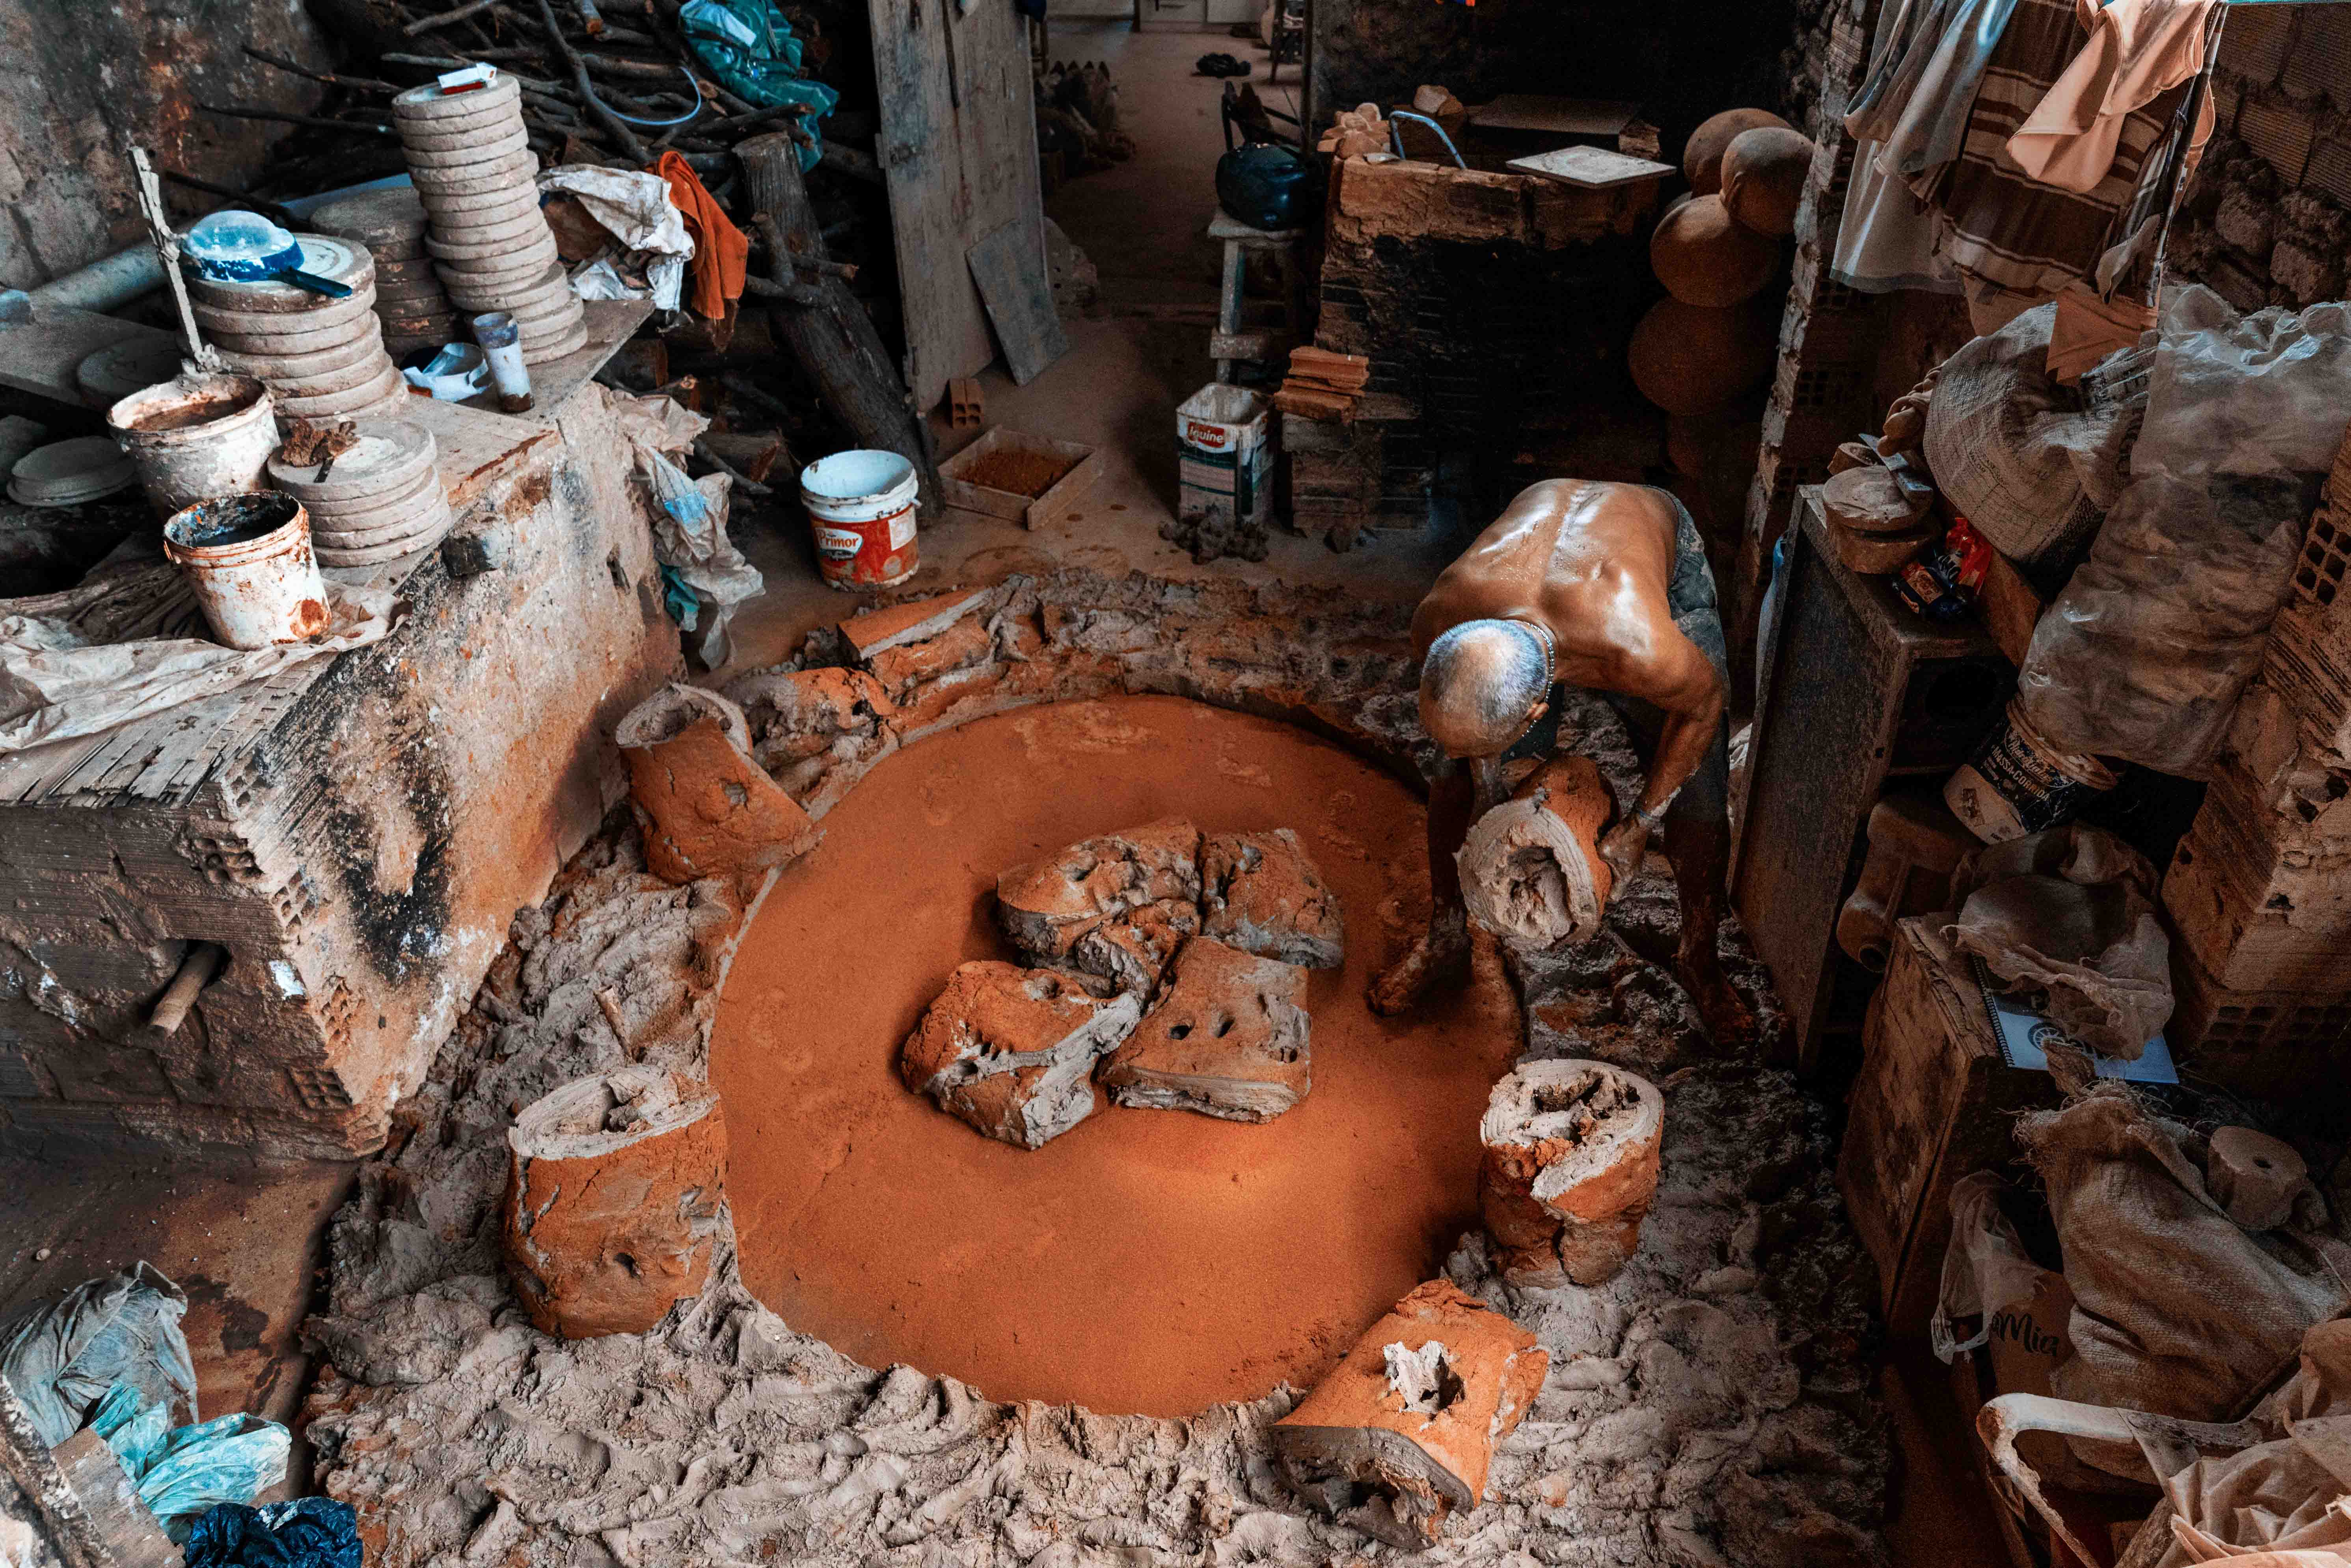 After treading the clay, Mr. Rosimario cuts it into radial shapes that are rolled up and stacked to be stepped on again. The entire process is repeated up to 3 times to have the ideal consistency.